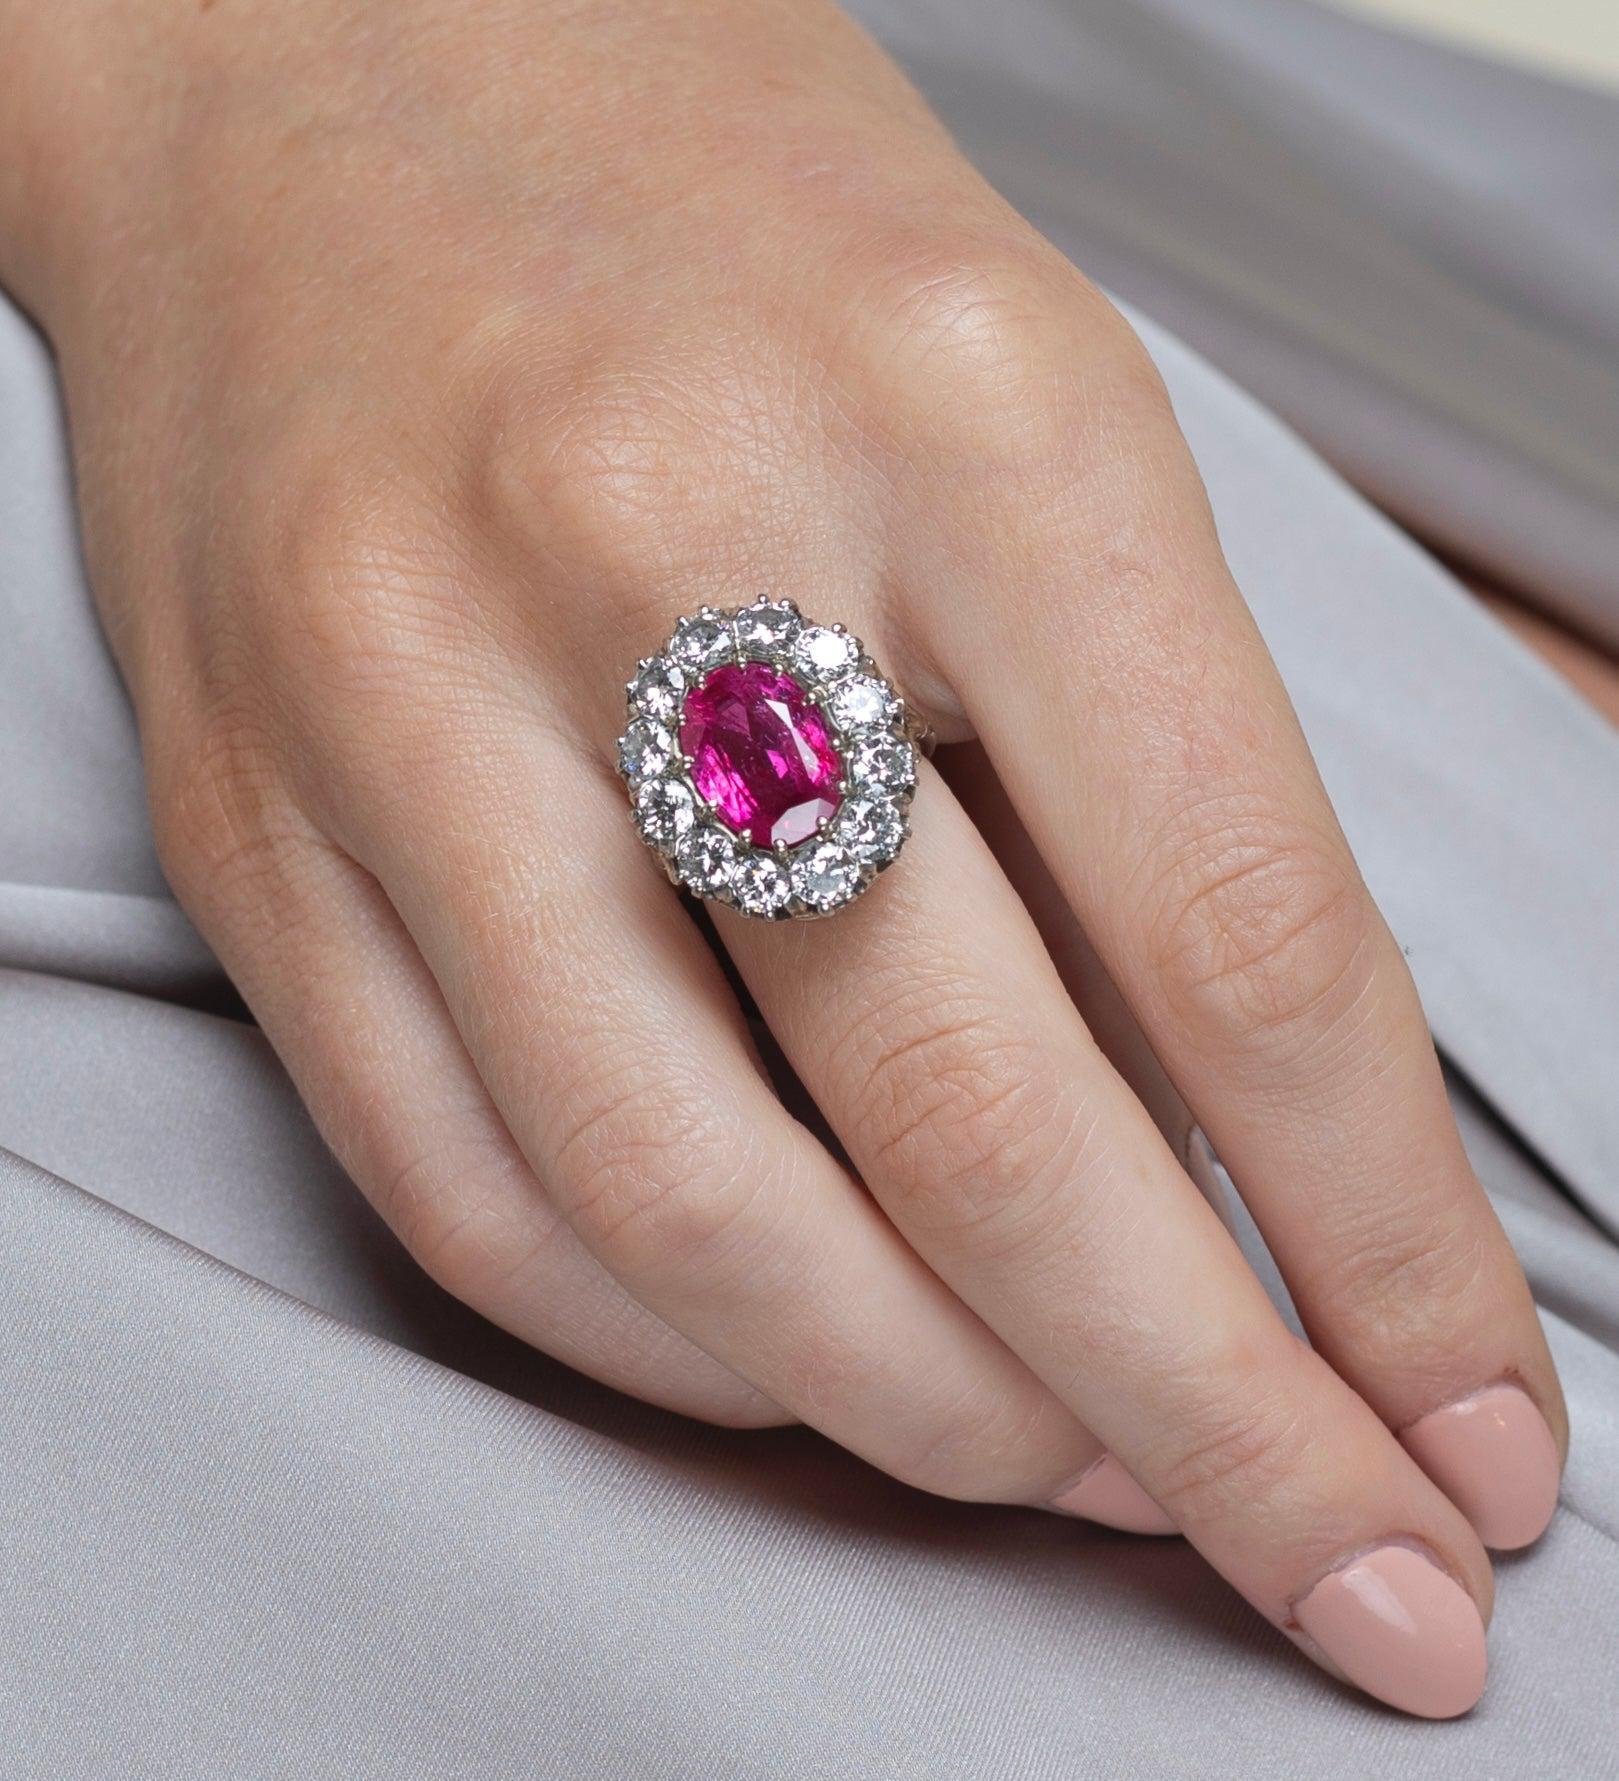 Art Deco AGL Certified 5.52 Carat Oval Cut Burma Ruby and Round Diamond Halo Ring-Rings-ASSAY